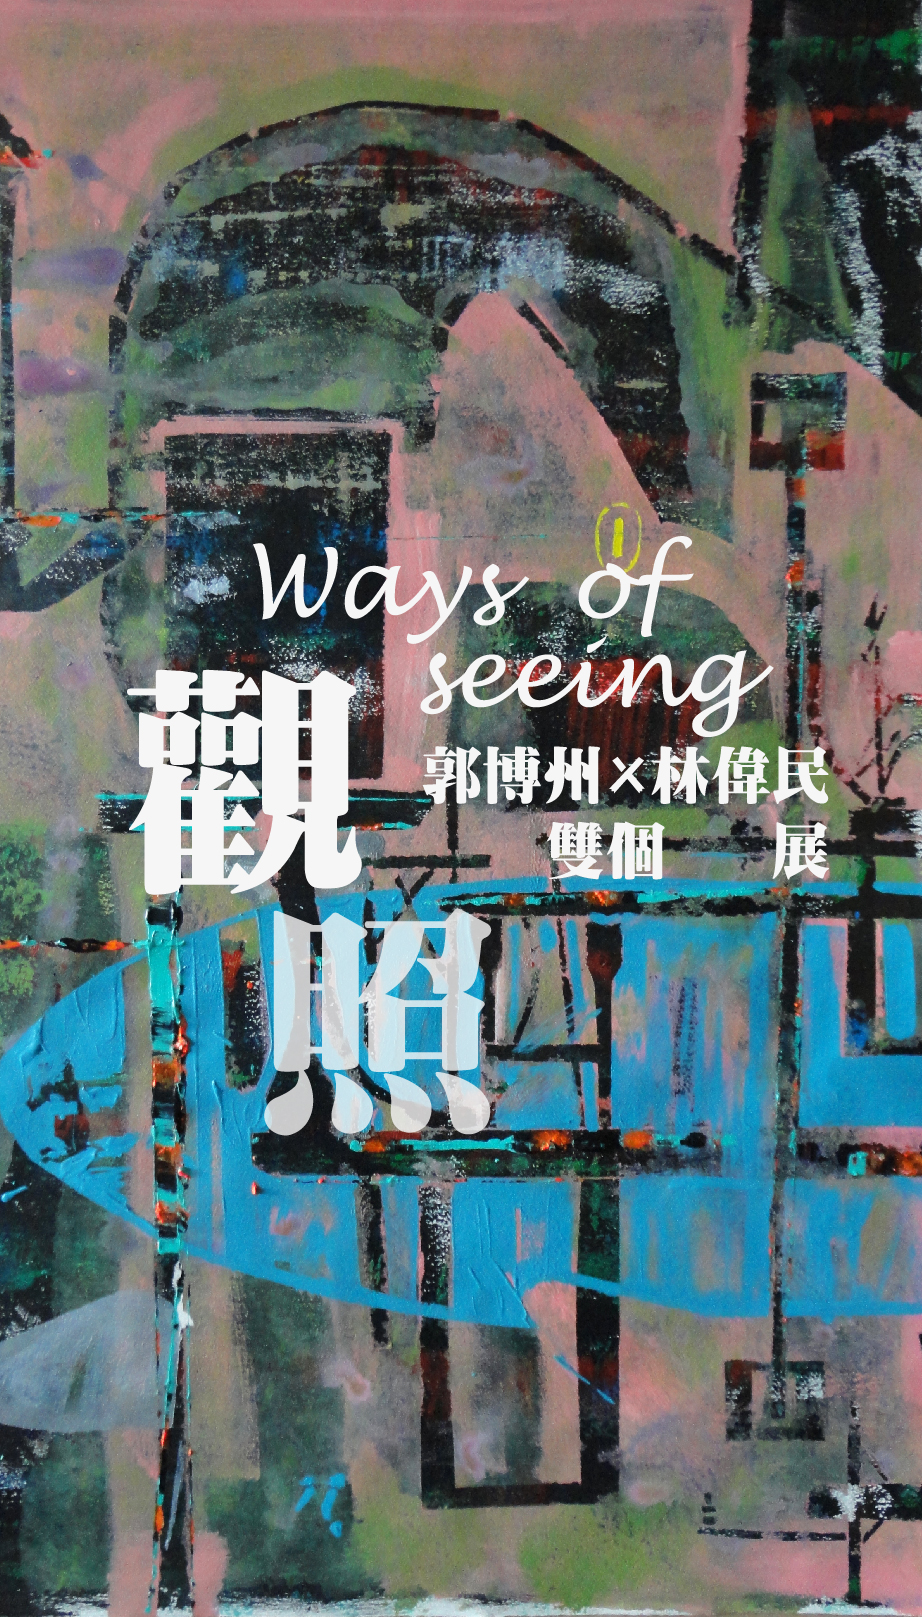 Ways of Seeing - Kuo bor-jou and Wei Min, LIN Duo Solo Exhibition